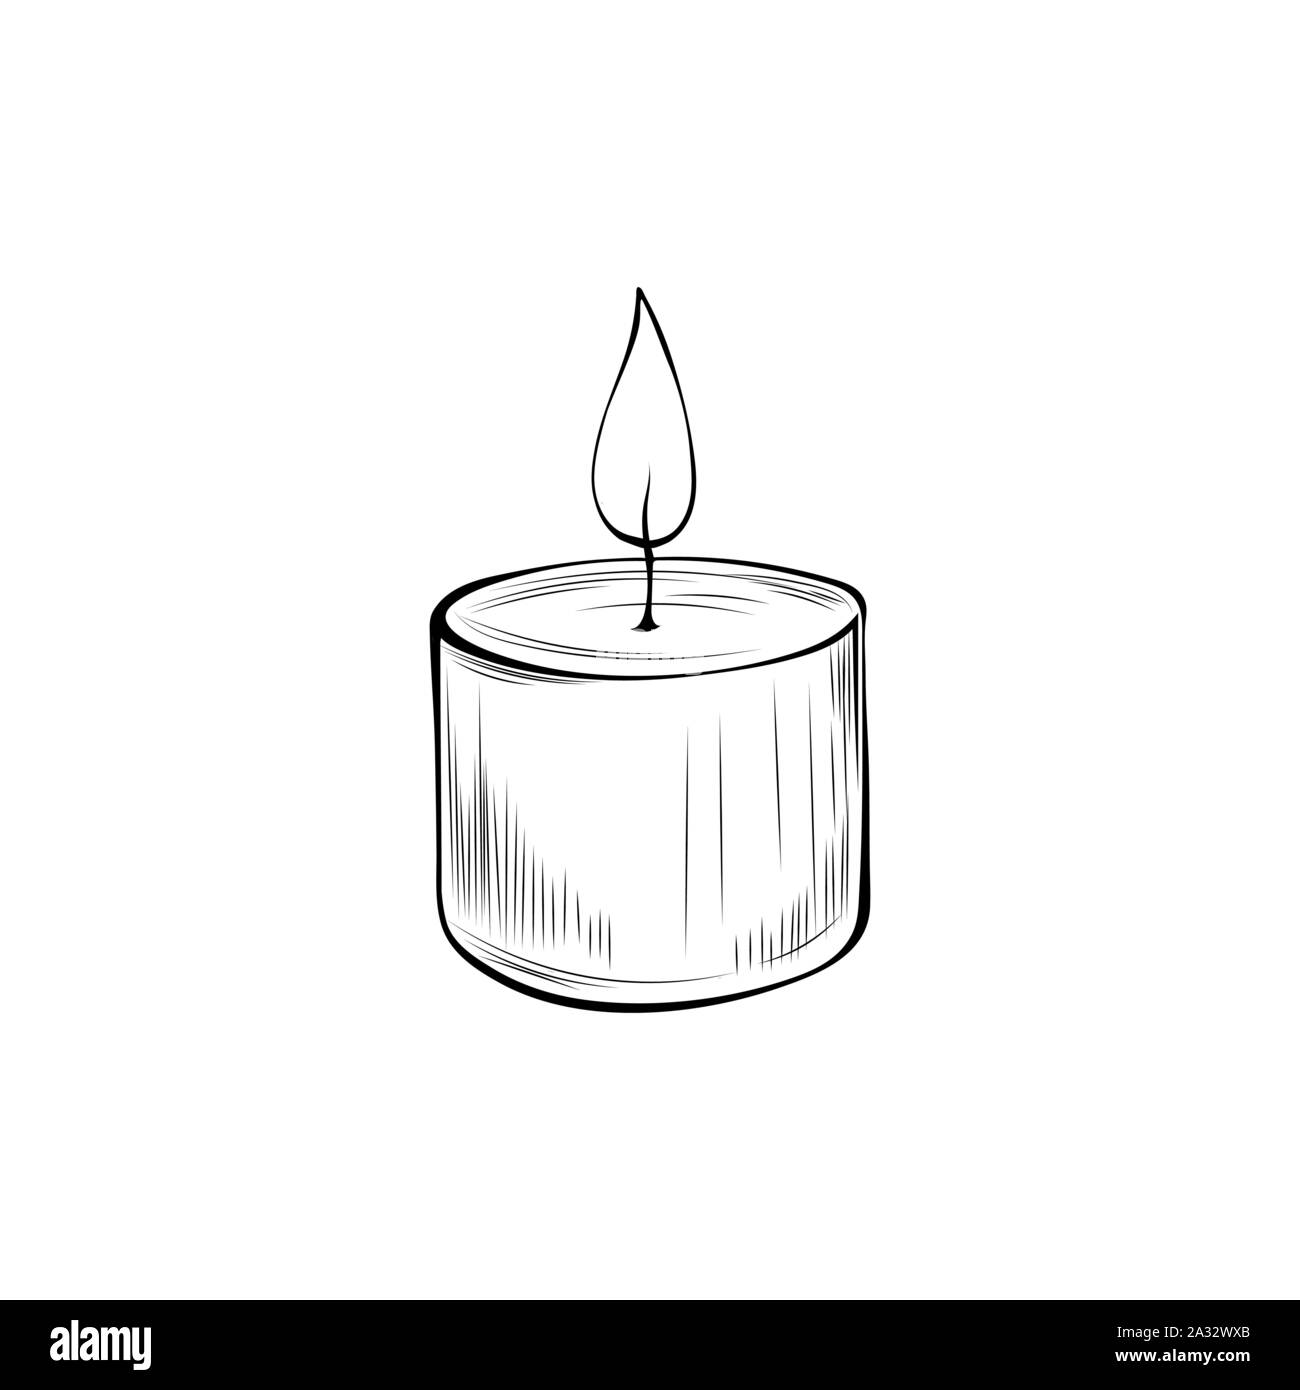 Premium Vector | Single candle drawing in a vector by hand